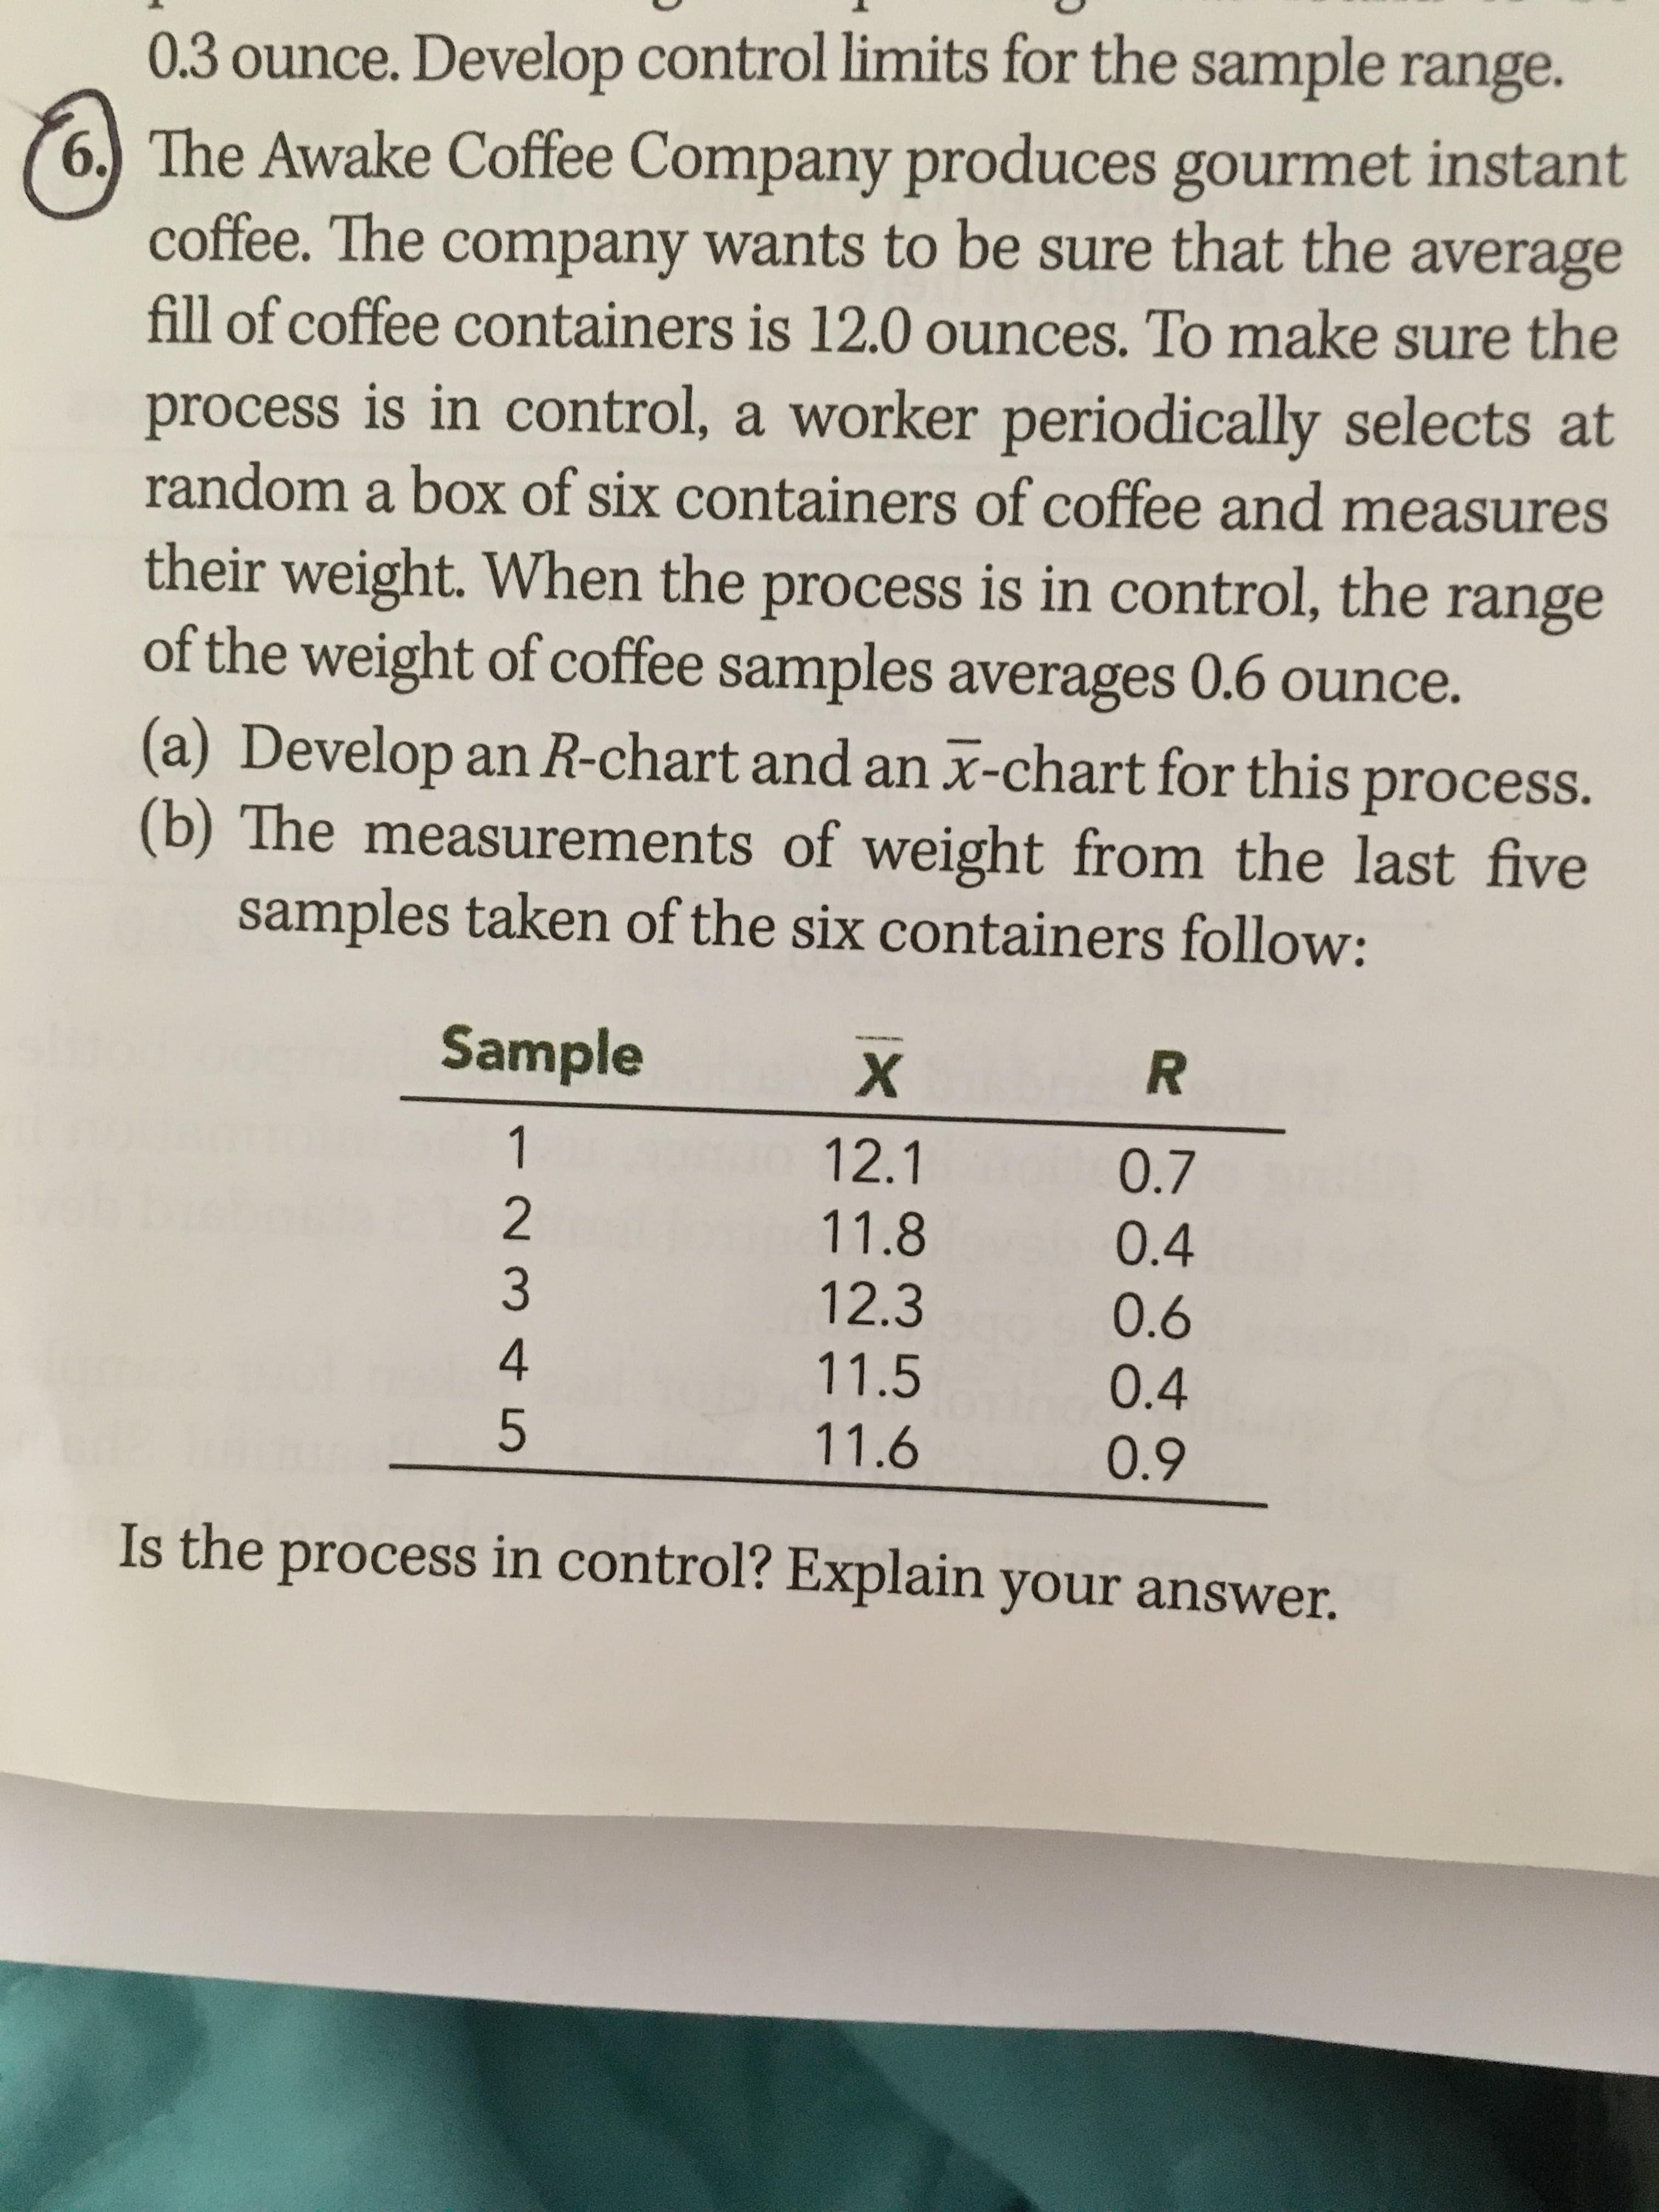 0.3 ounce. Develop control limits for the sample range.
6. The Awake Coffee Company produces gourmet instant
coffee. The company wants to be sure that the average
fill of coffee containers is 12.0 ounces. To make sure the
process is in control, a worker periodically selects at
random a box of six containers of coffee and measures
their weight. When the process is in control, the range
of the weight of coffee samples averages 0.6 ounce.
(a) Develop an R-chart and an x-chart for this process.
(b) The measurements of weight from the last five
samples taken of the six containers follow:
Sample
х
1
12.1
0.7
11.8
0.4
12.3
0.6
11.5
0.4
11.6
0.9
Is the process in control? Explain your answer.
